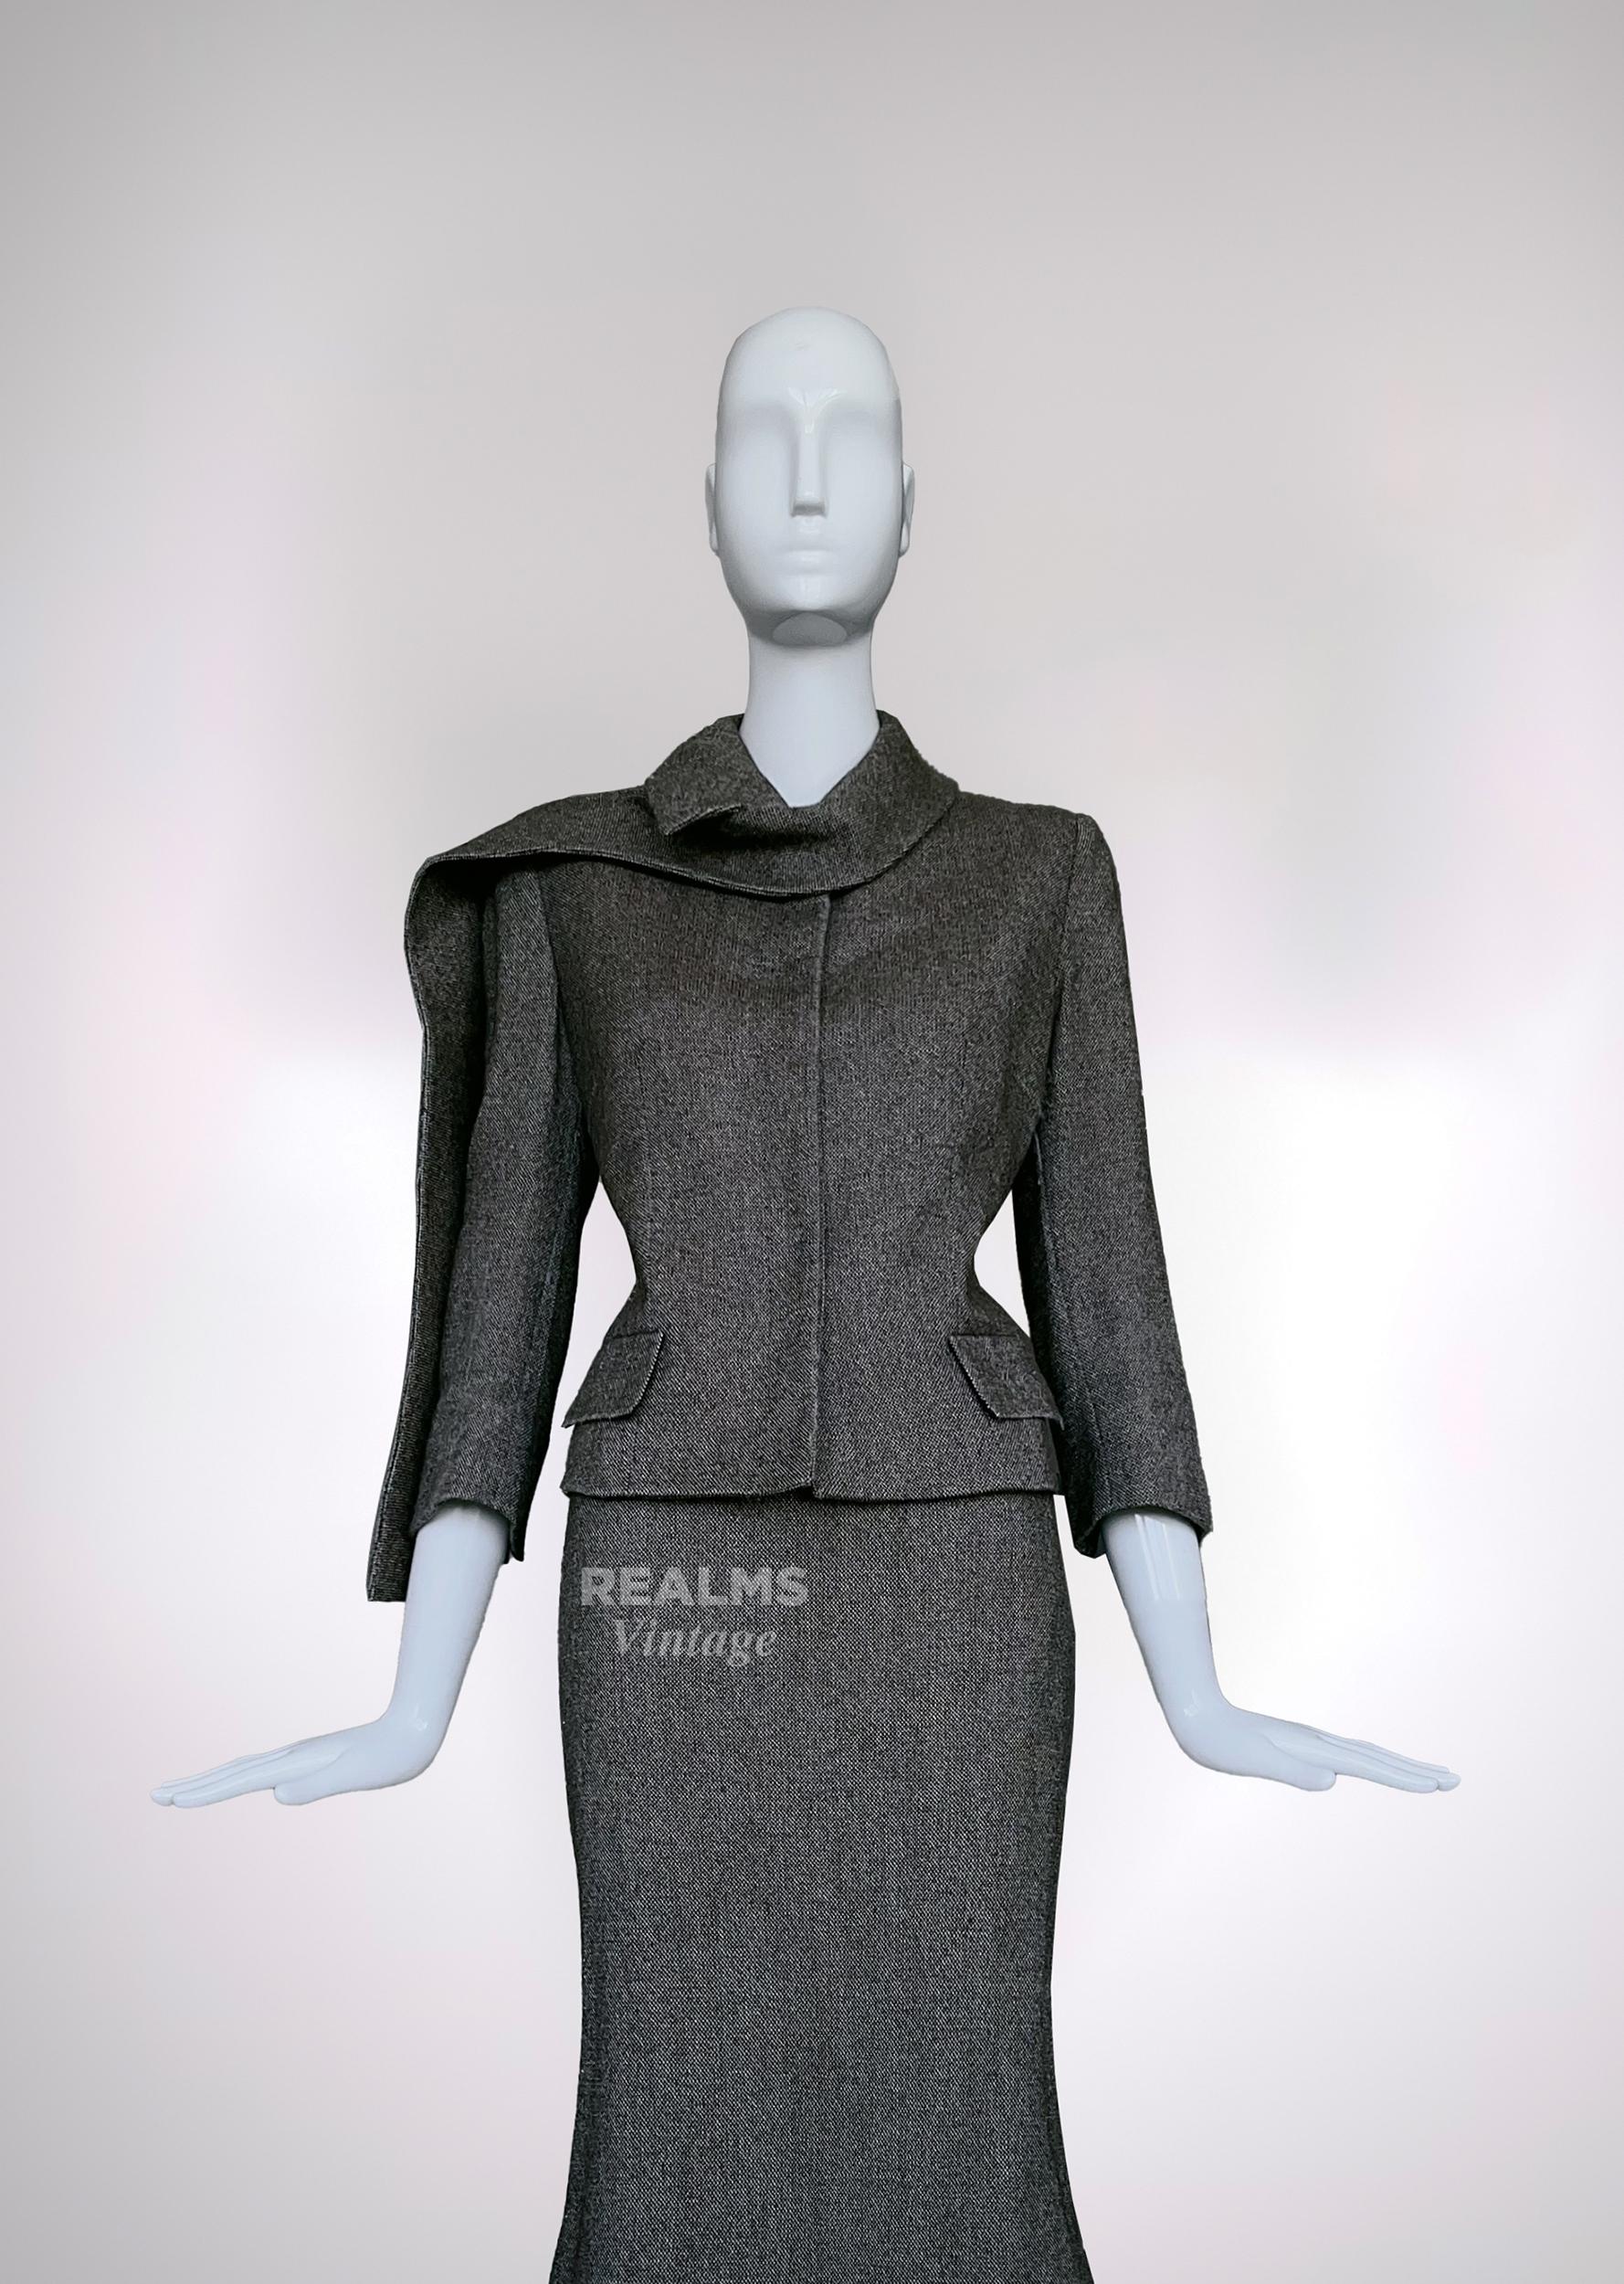 Alexander McQueen Archival FW 2005 'The Man Who Knew Too Much' Wool Skirt Suit In Good Condition For Sale In Berlin, BE